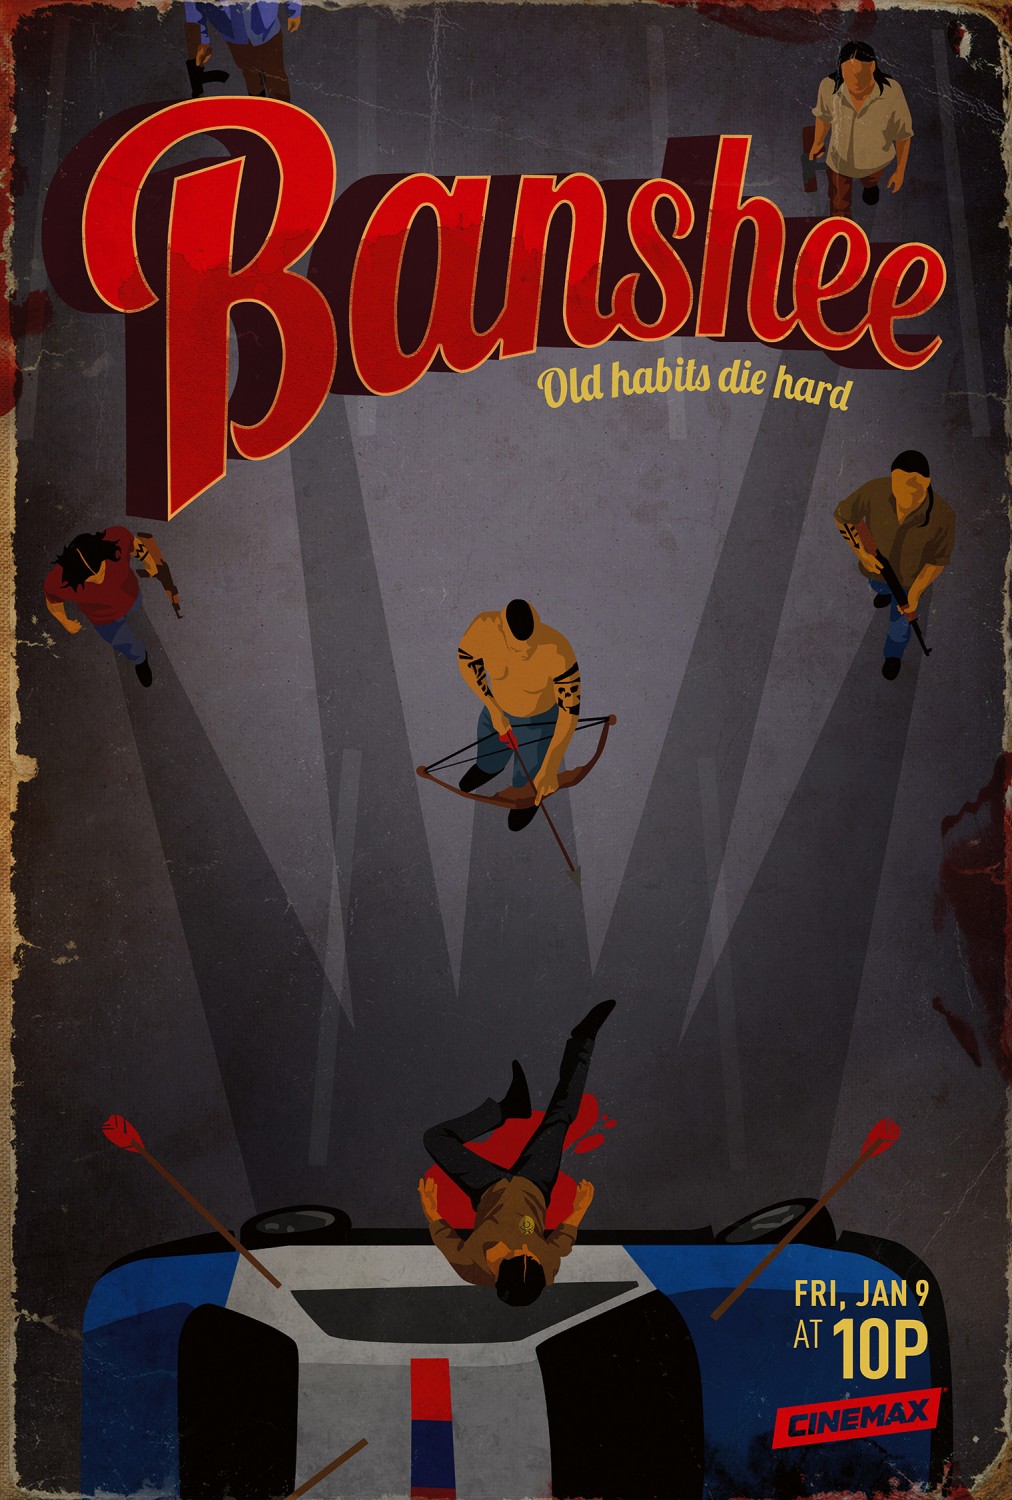 Extra Large TV Poster Image for Banshee (#9 of 18)